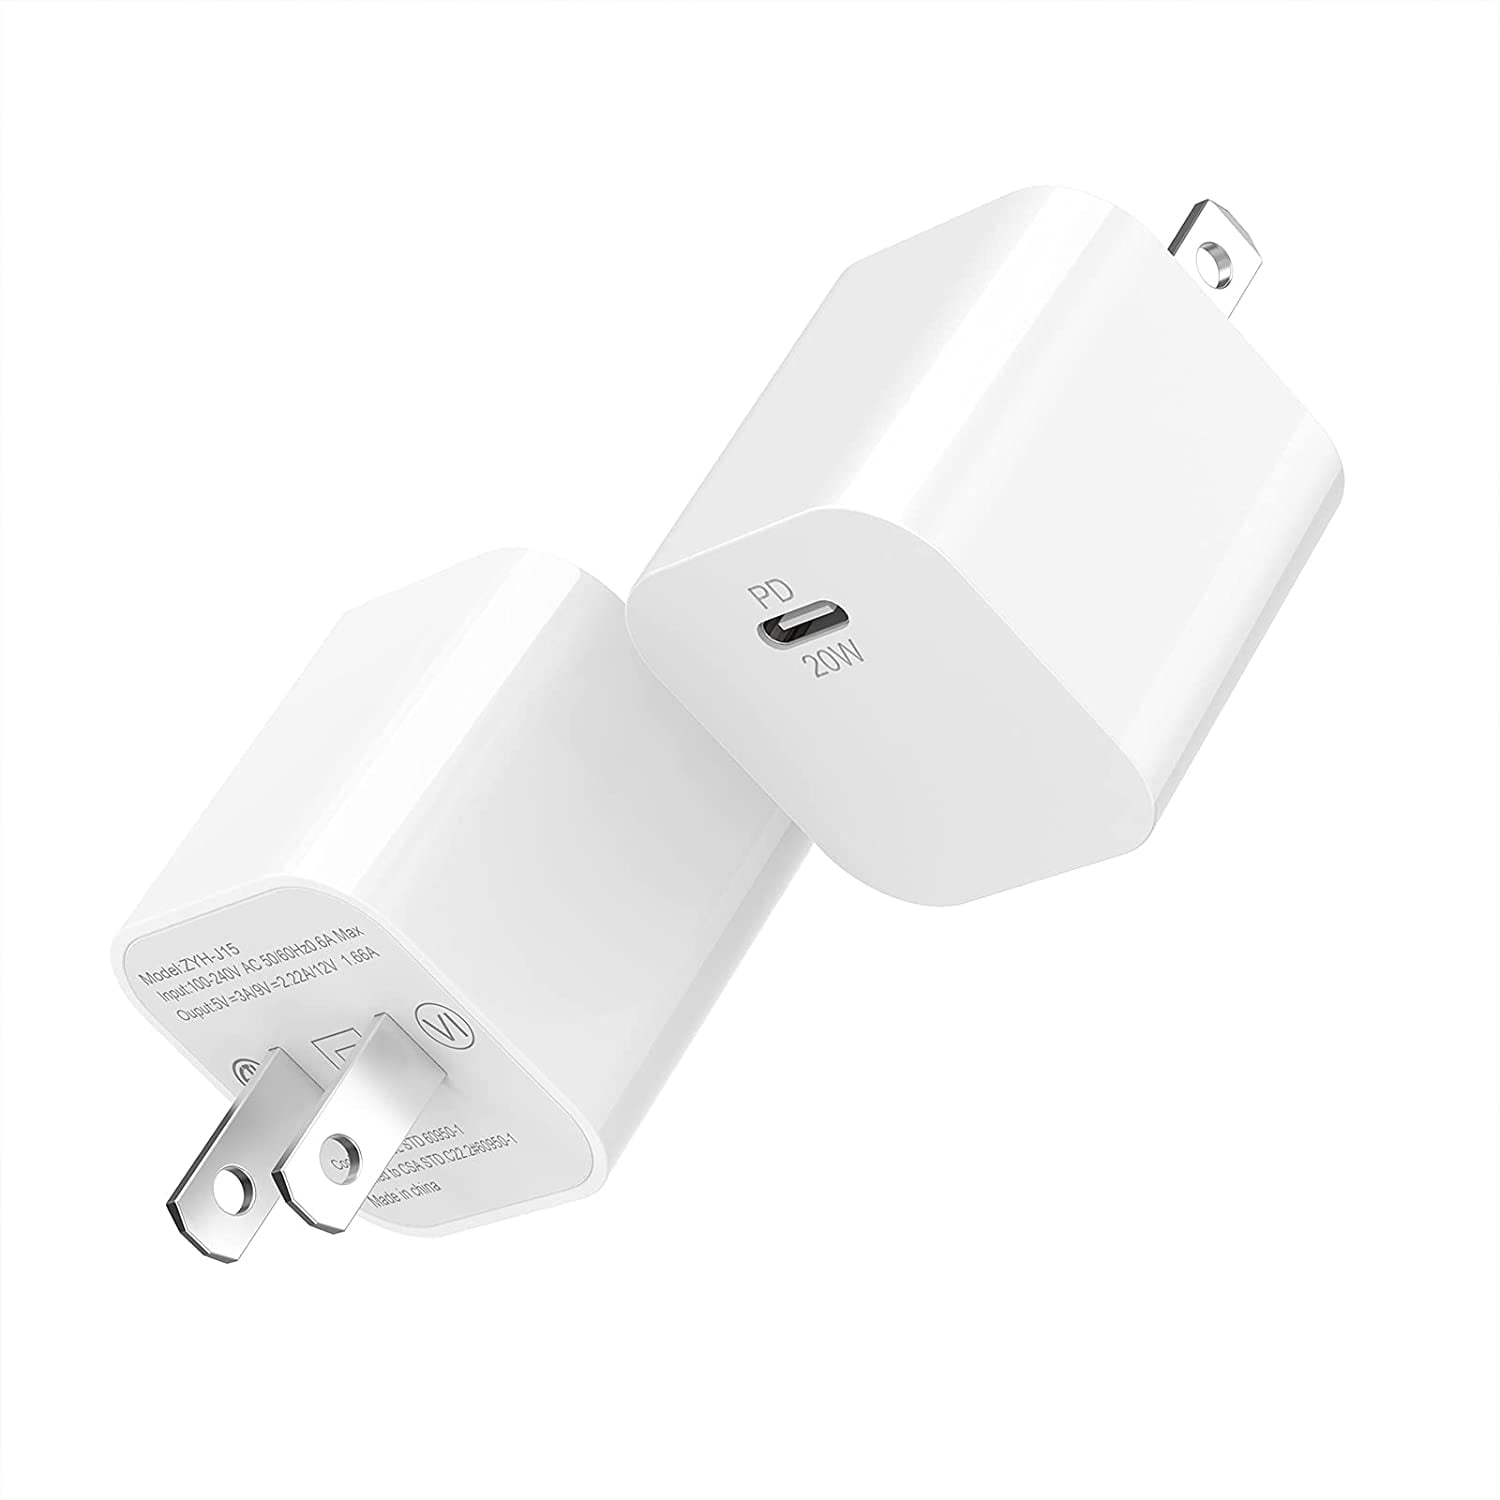 Besætte Konkret pence iPhone Fast Charger Block, 2Pack 20W USB C Wall Charging Plug Block with  PD, Type-C Power Adapter Brick Cube for Apple iPhone 14/14 Pro/13/13  Pro/12/12 Mini/11 Pro,iPad Pro ,Samsung Galaxy - Walmart.com